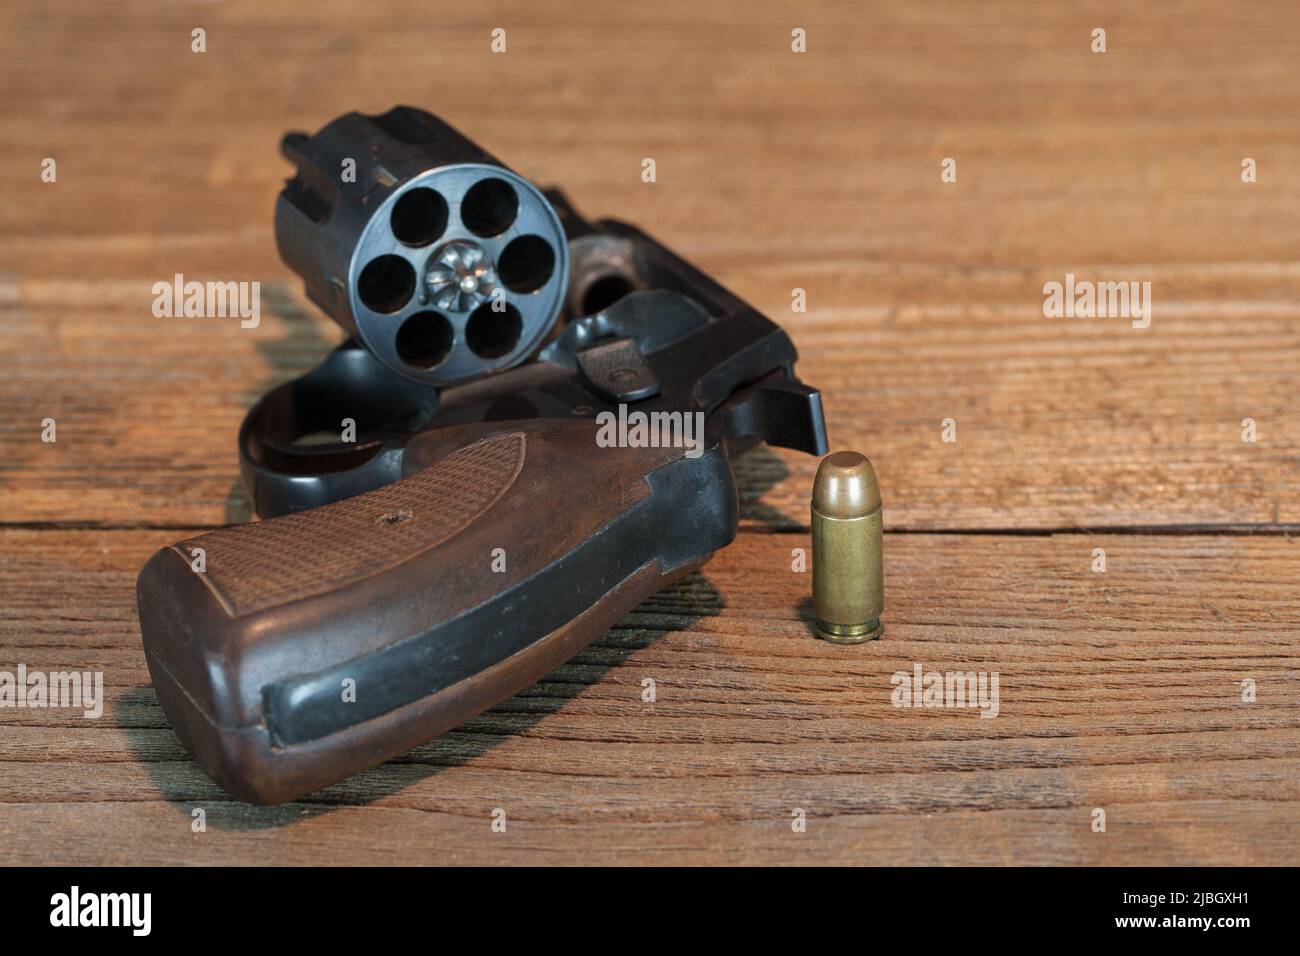 The last cartridge. A cartridge stands on a wooden table next to an open revolver. Stock Photo